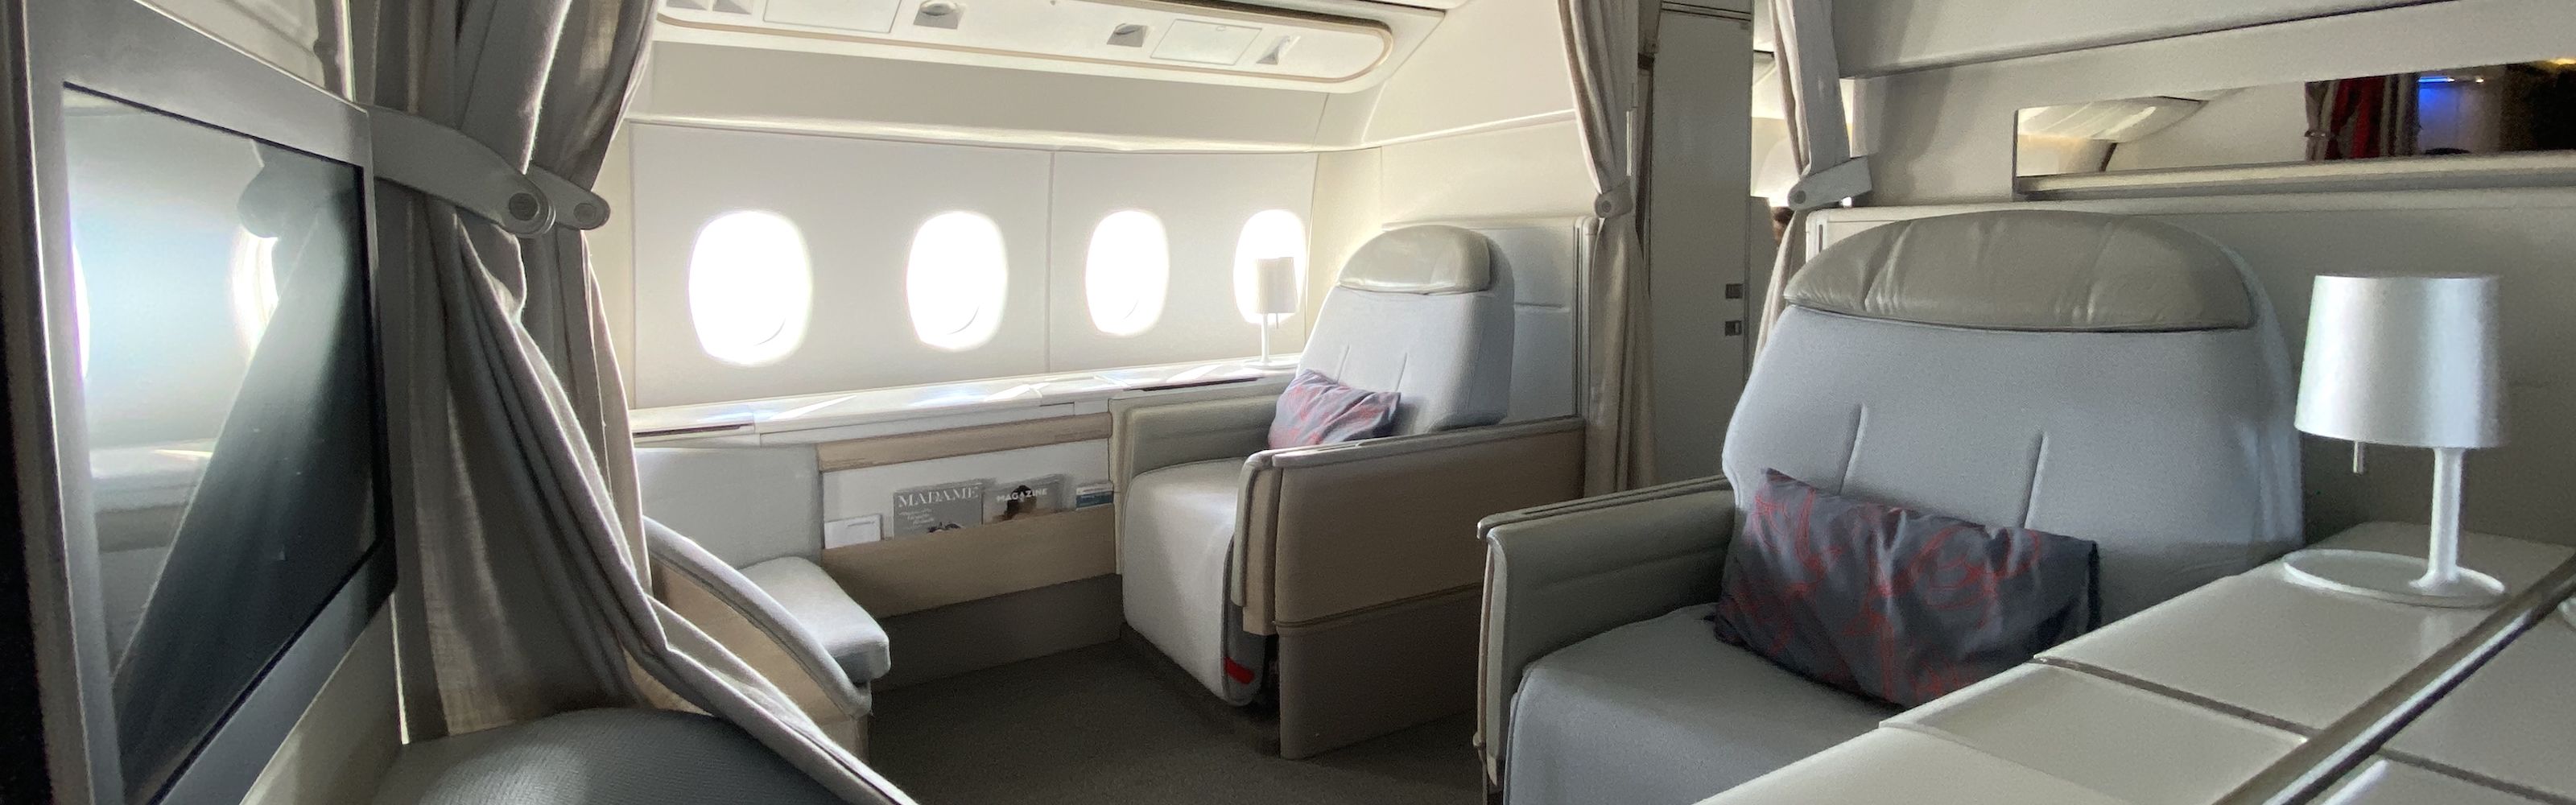 Use your travel rewards to book the best first-class seats | CNN Underscored